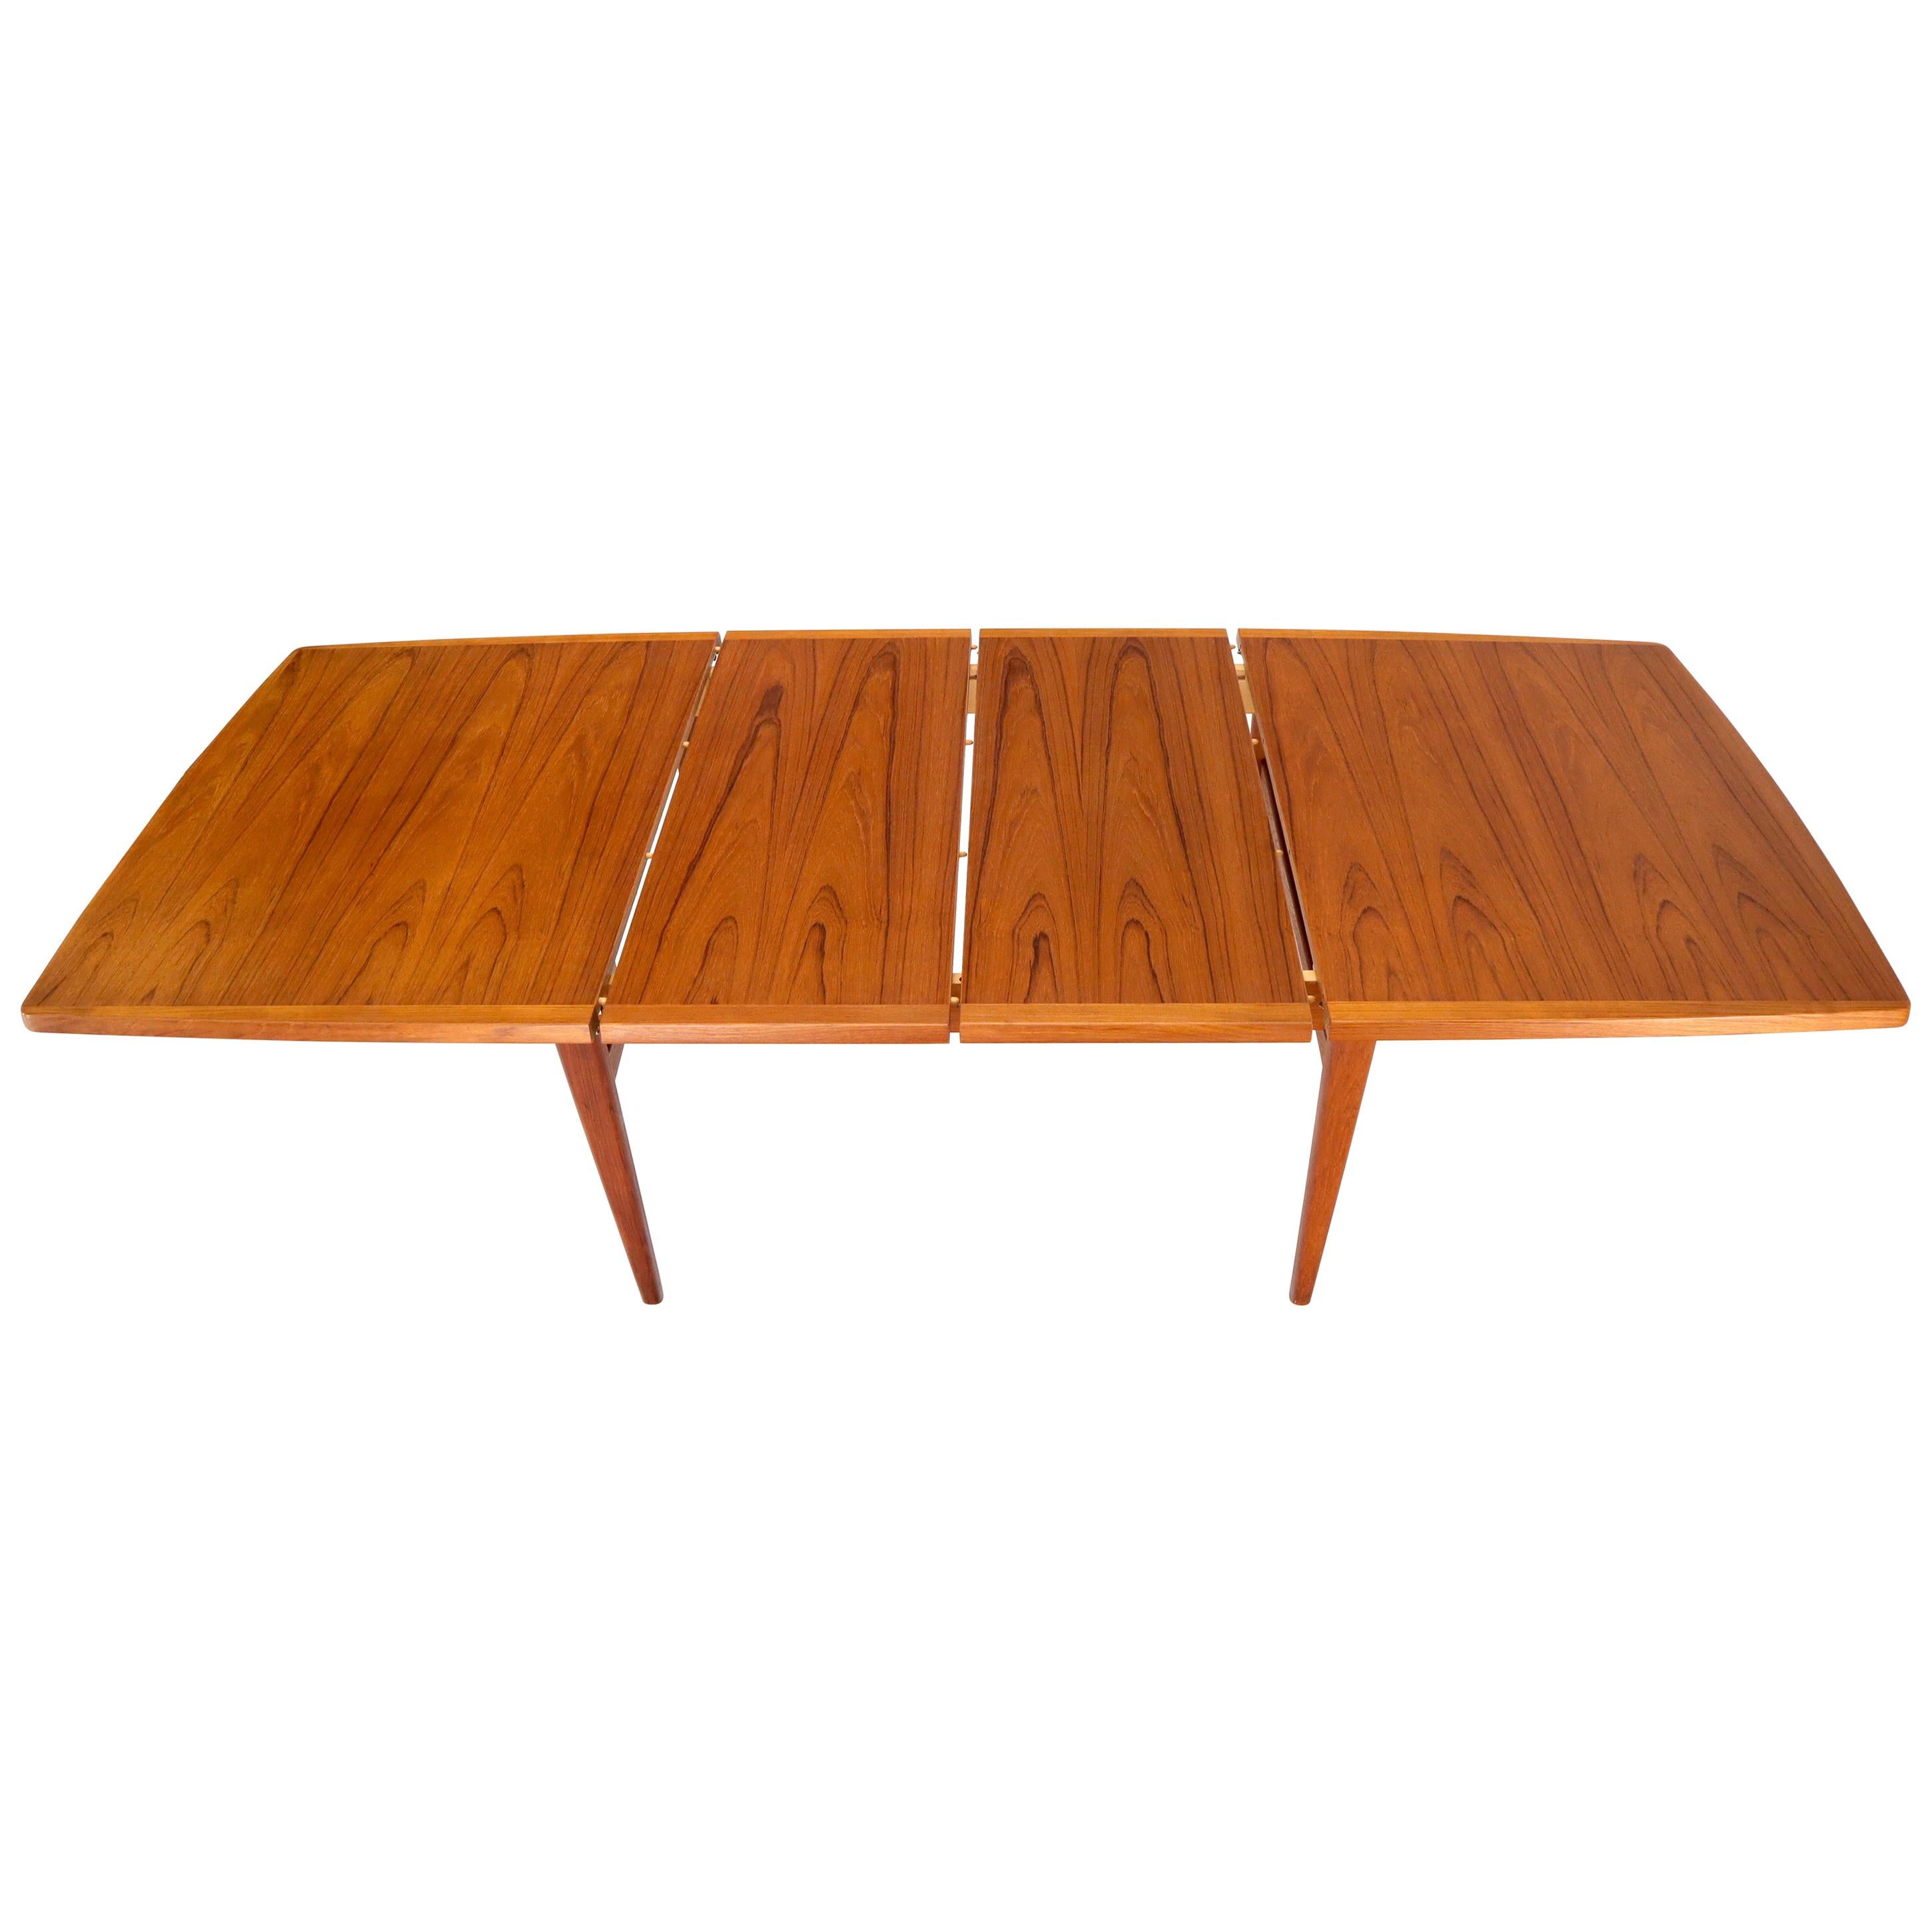 Danish Mid-Century Modern Teak Dining Table with Two Extension Boards Leaves